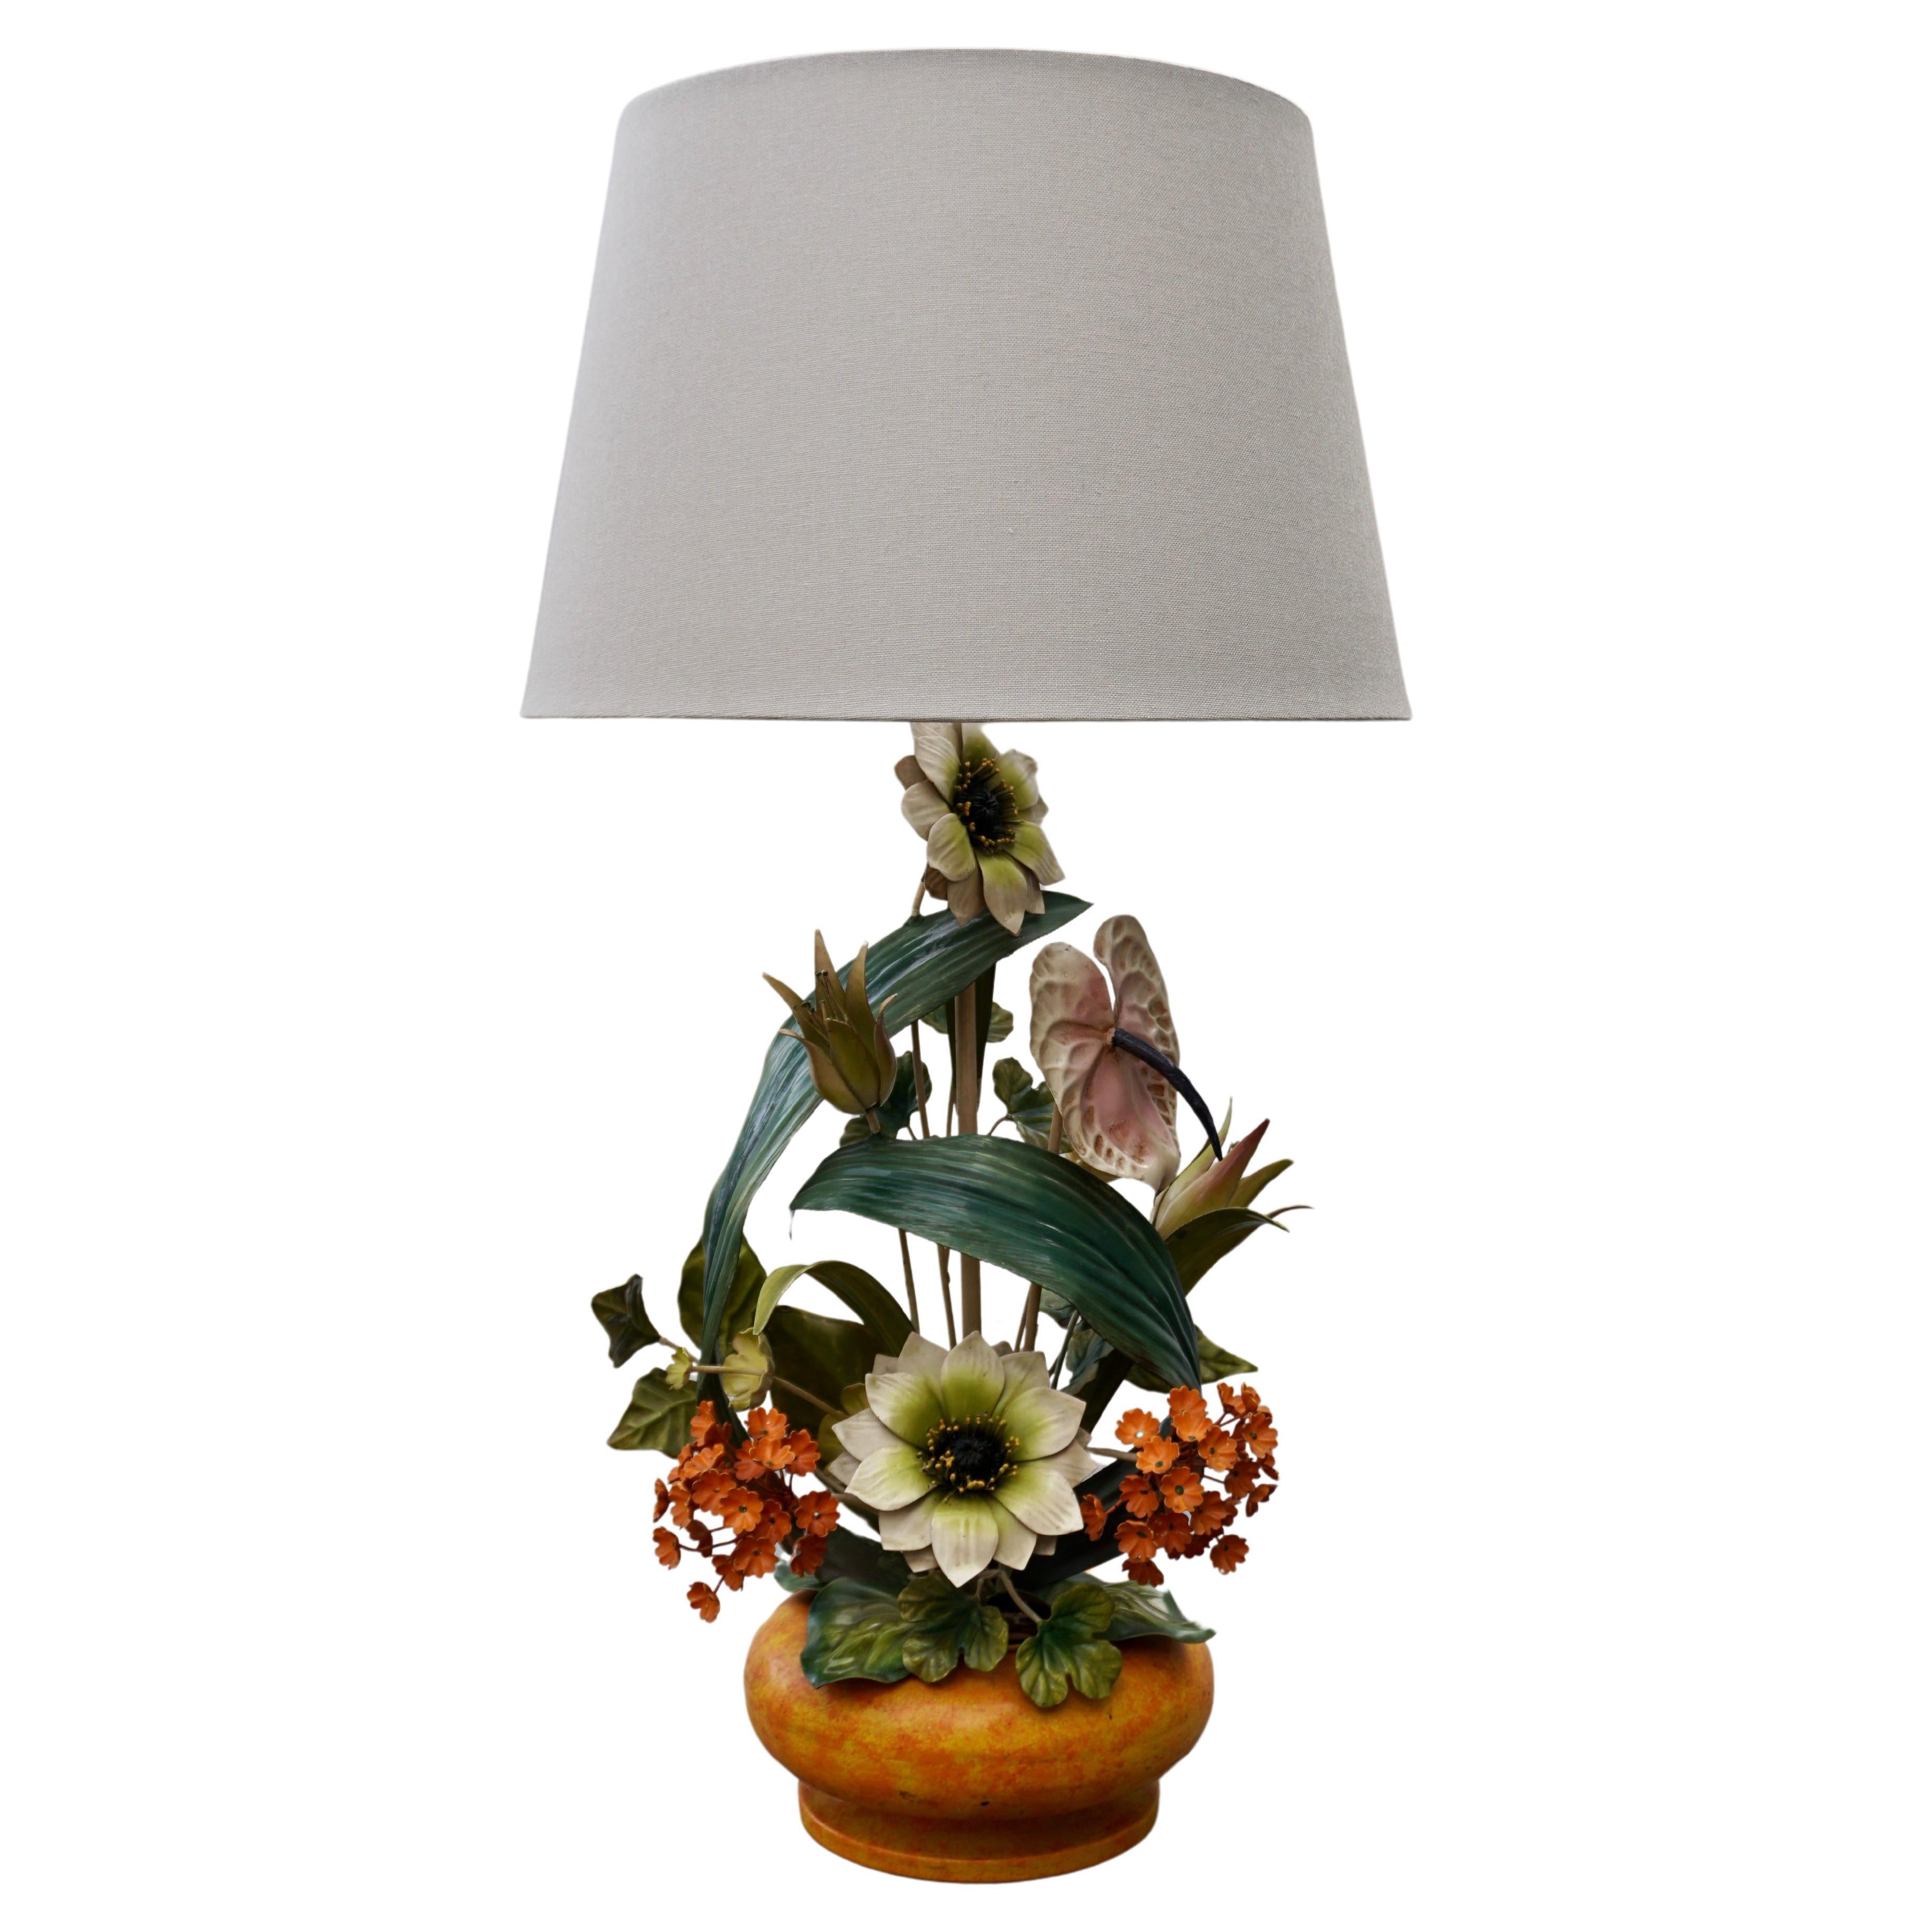 Vintage Tole Toleware Metal Art Flower Petite Lamp Italy Shabby Chic For Sale